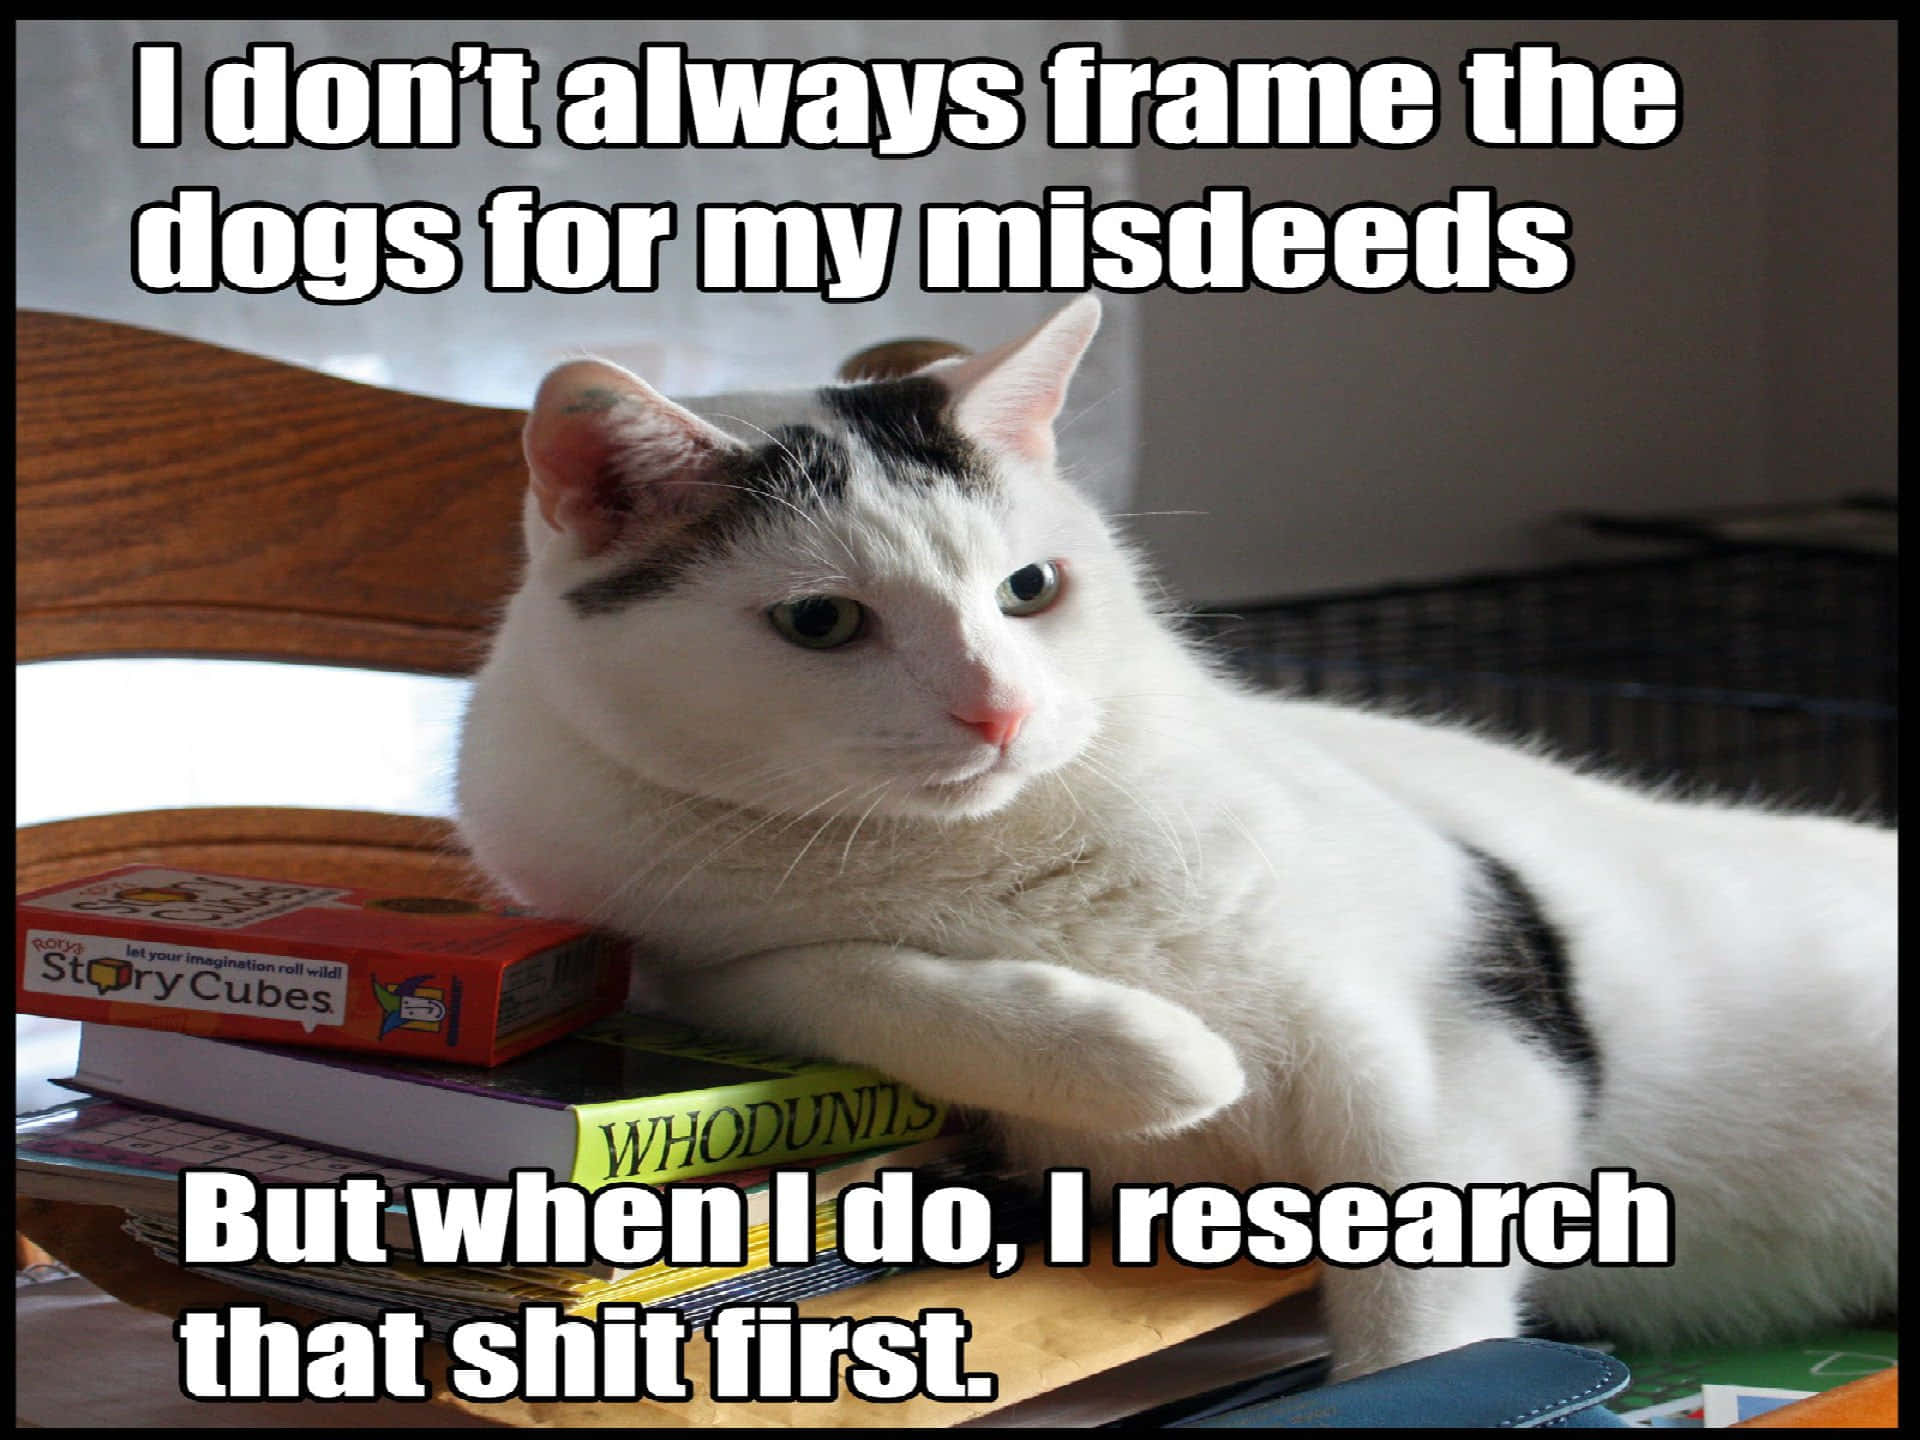 meme, memes and cat - image #6388486 on